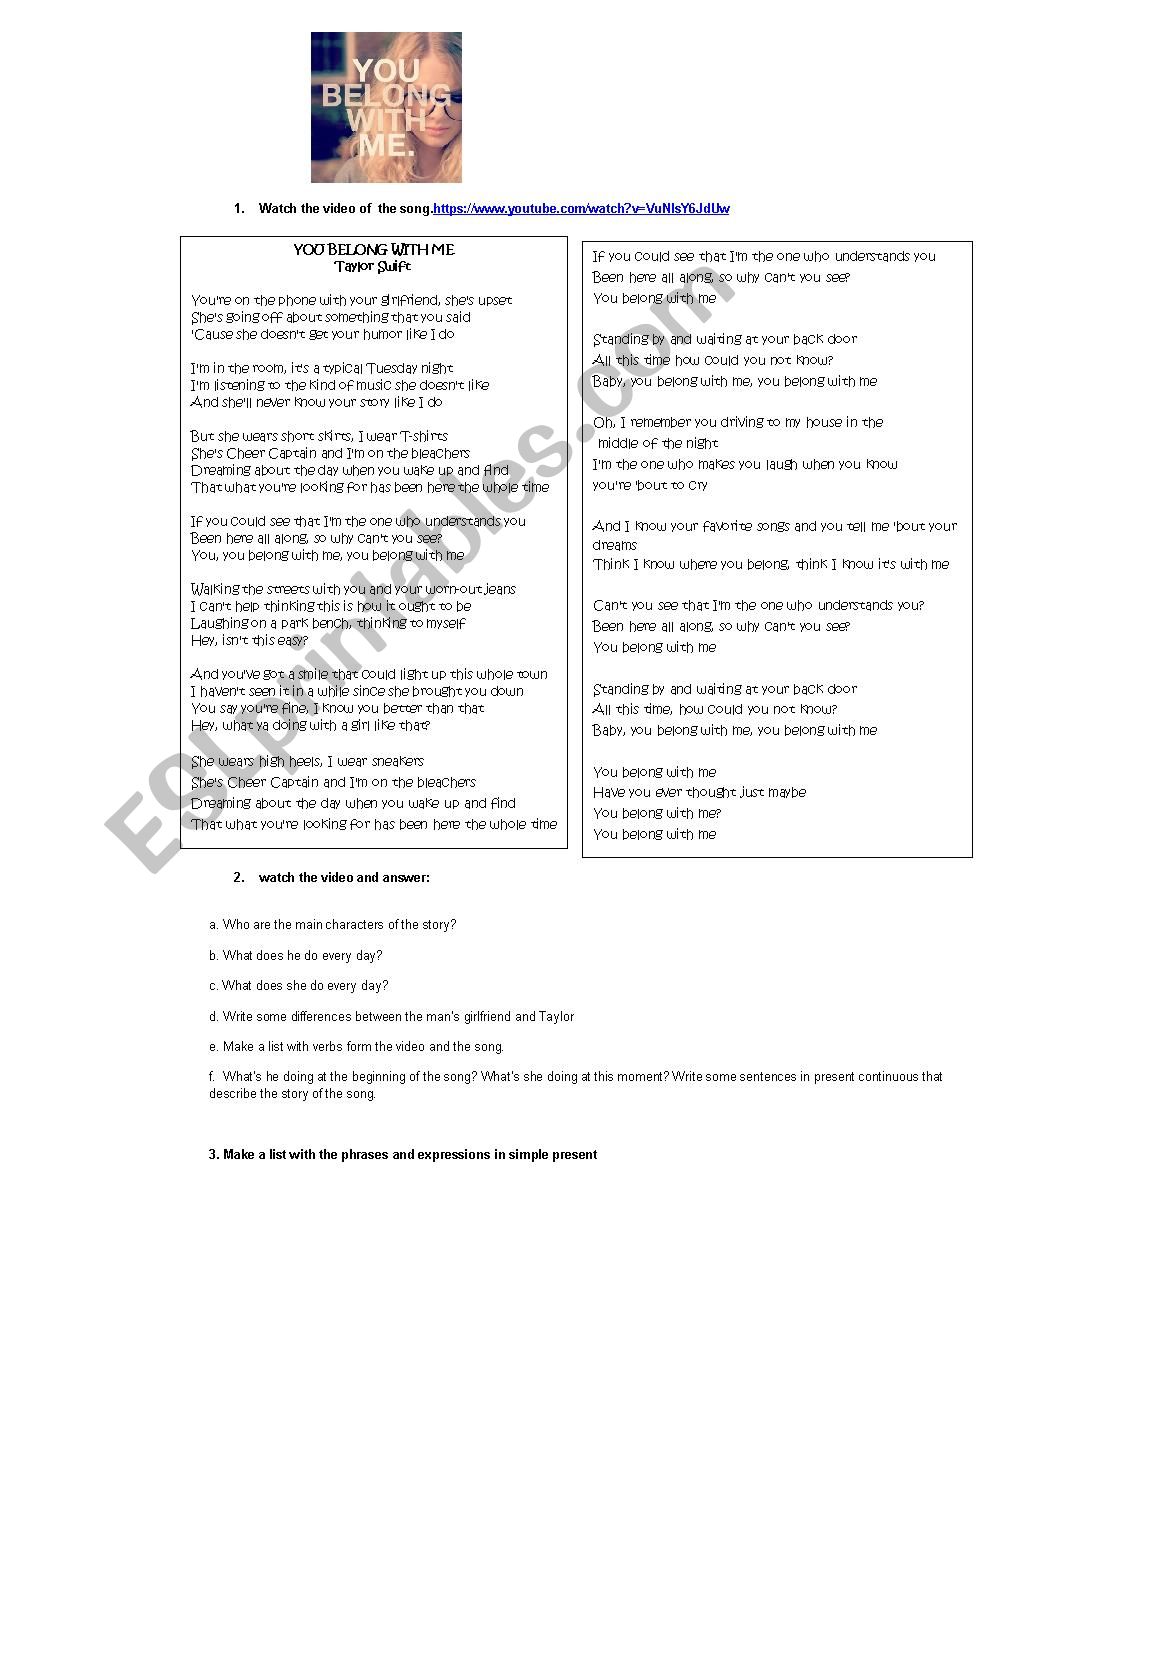 You belong with me song worksheet